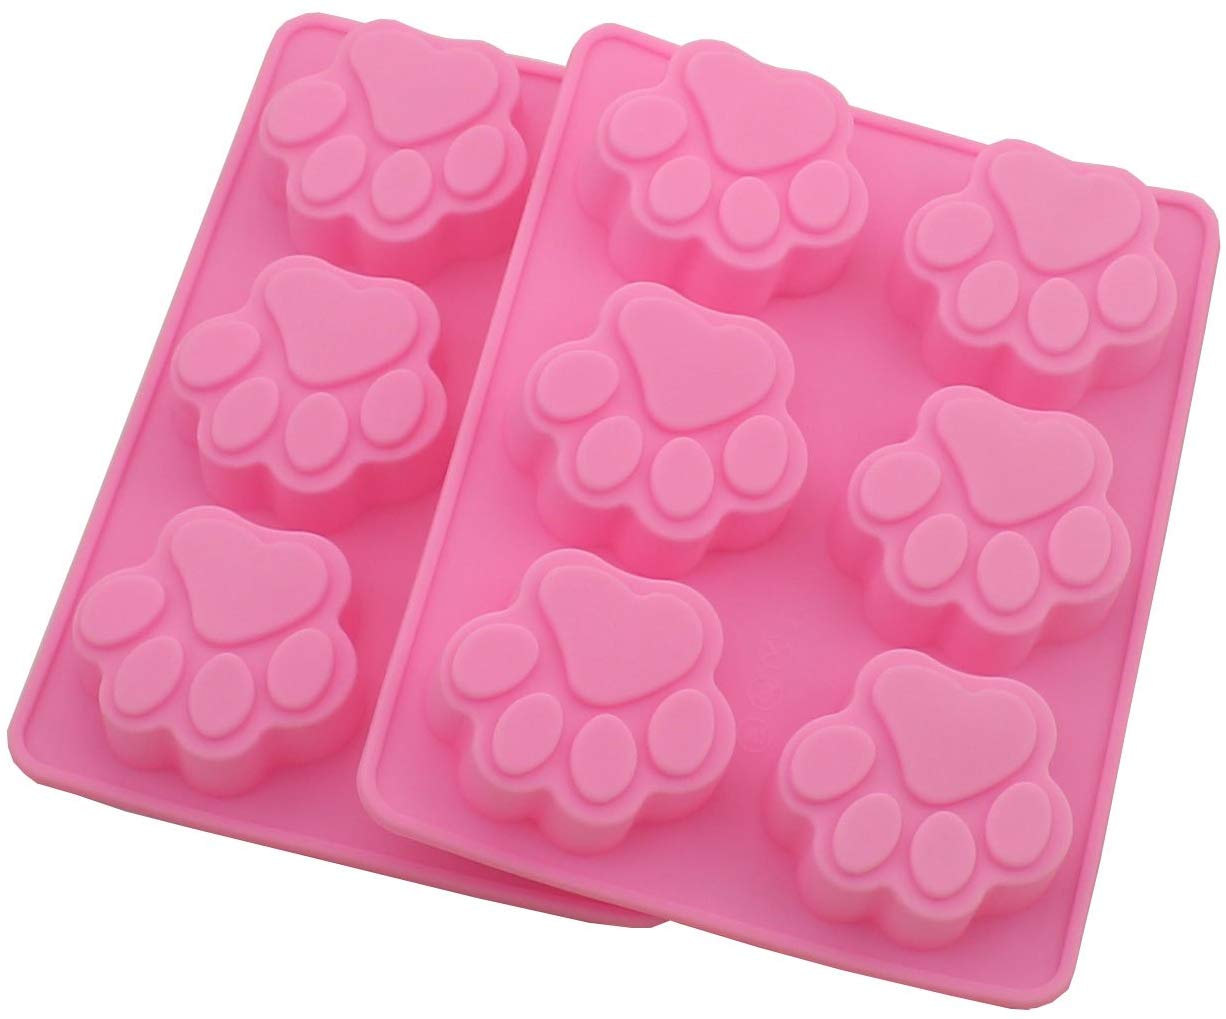 Silicone Molds for Dog Treats – Paw Prints!